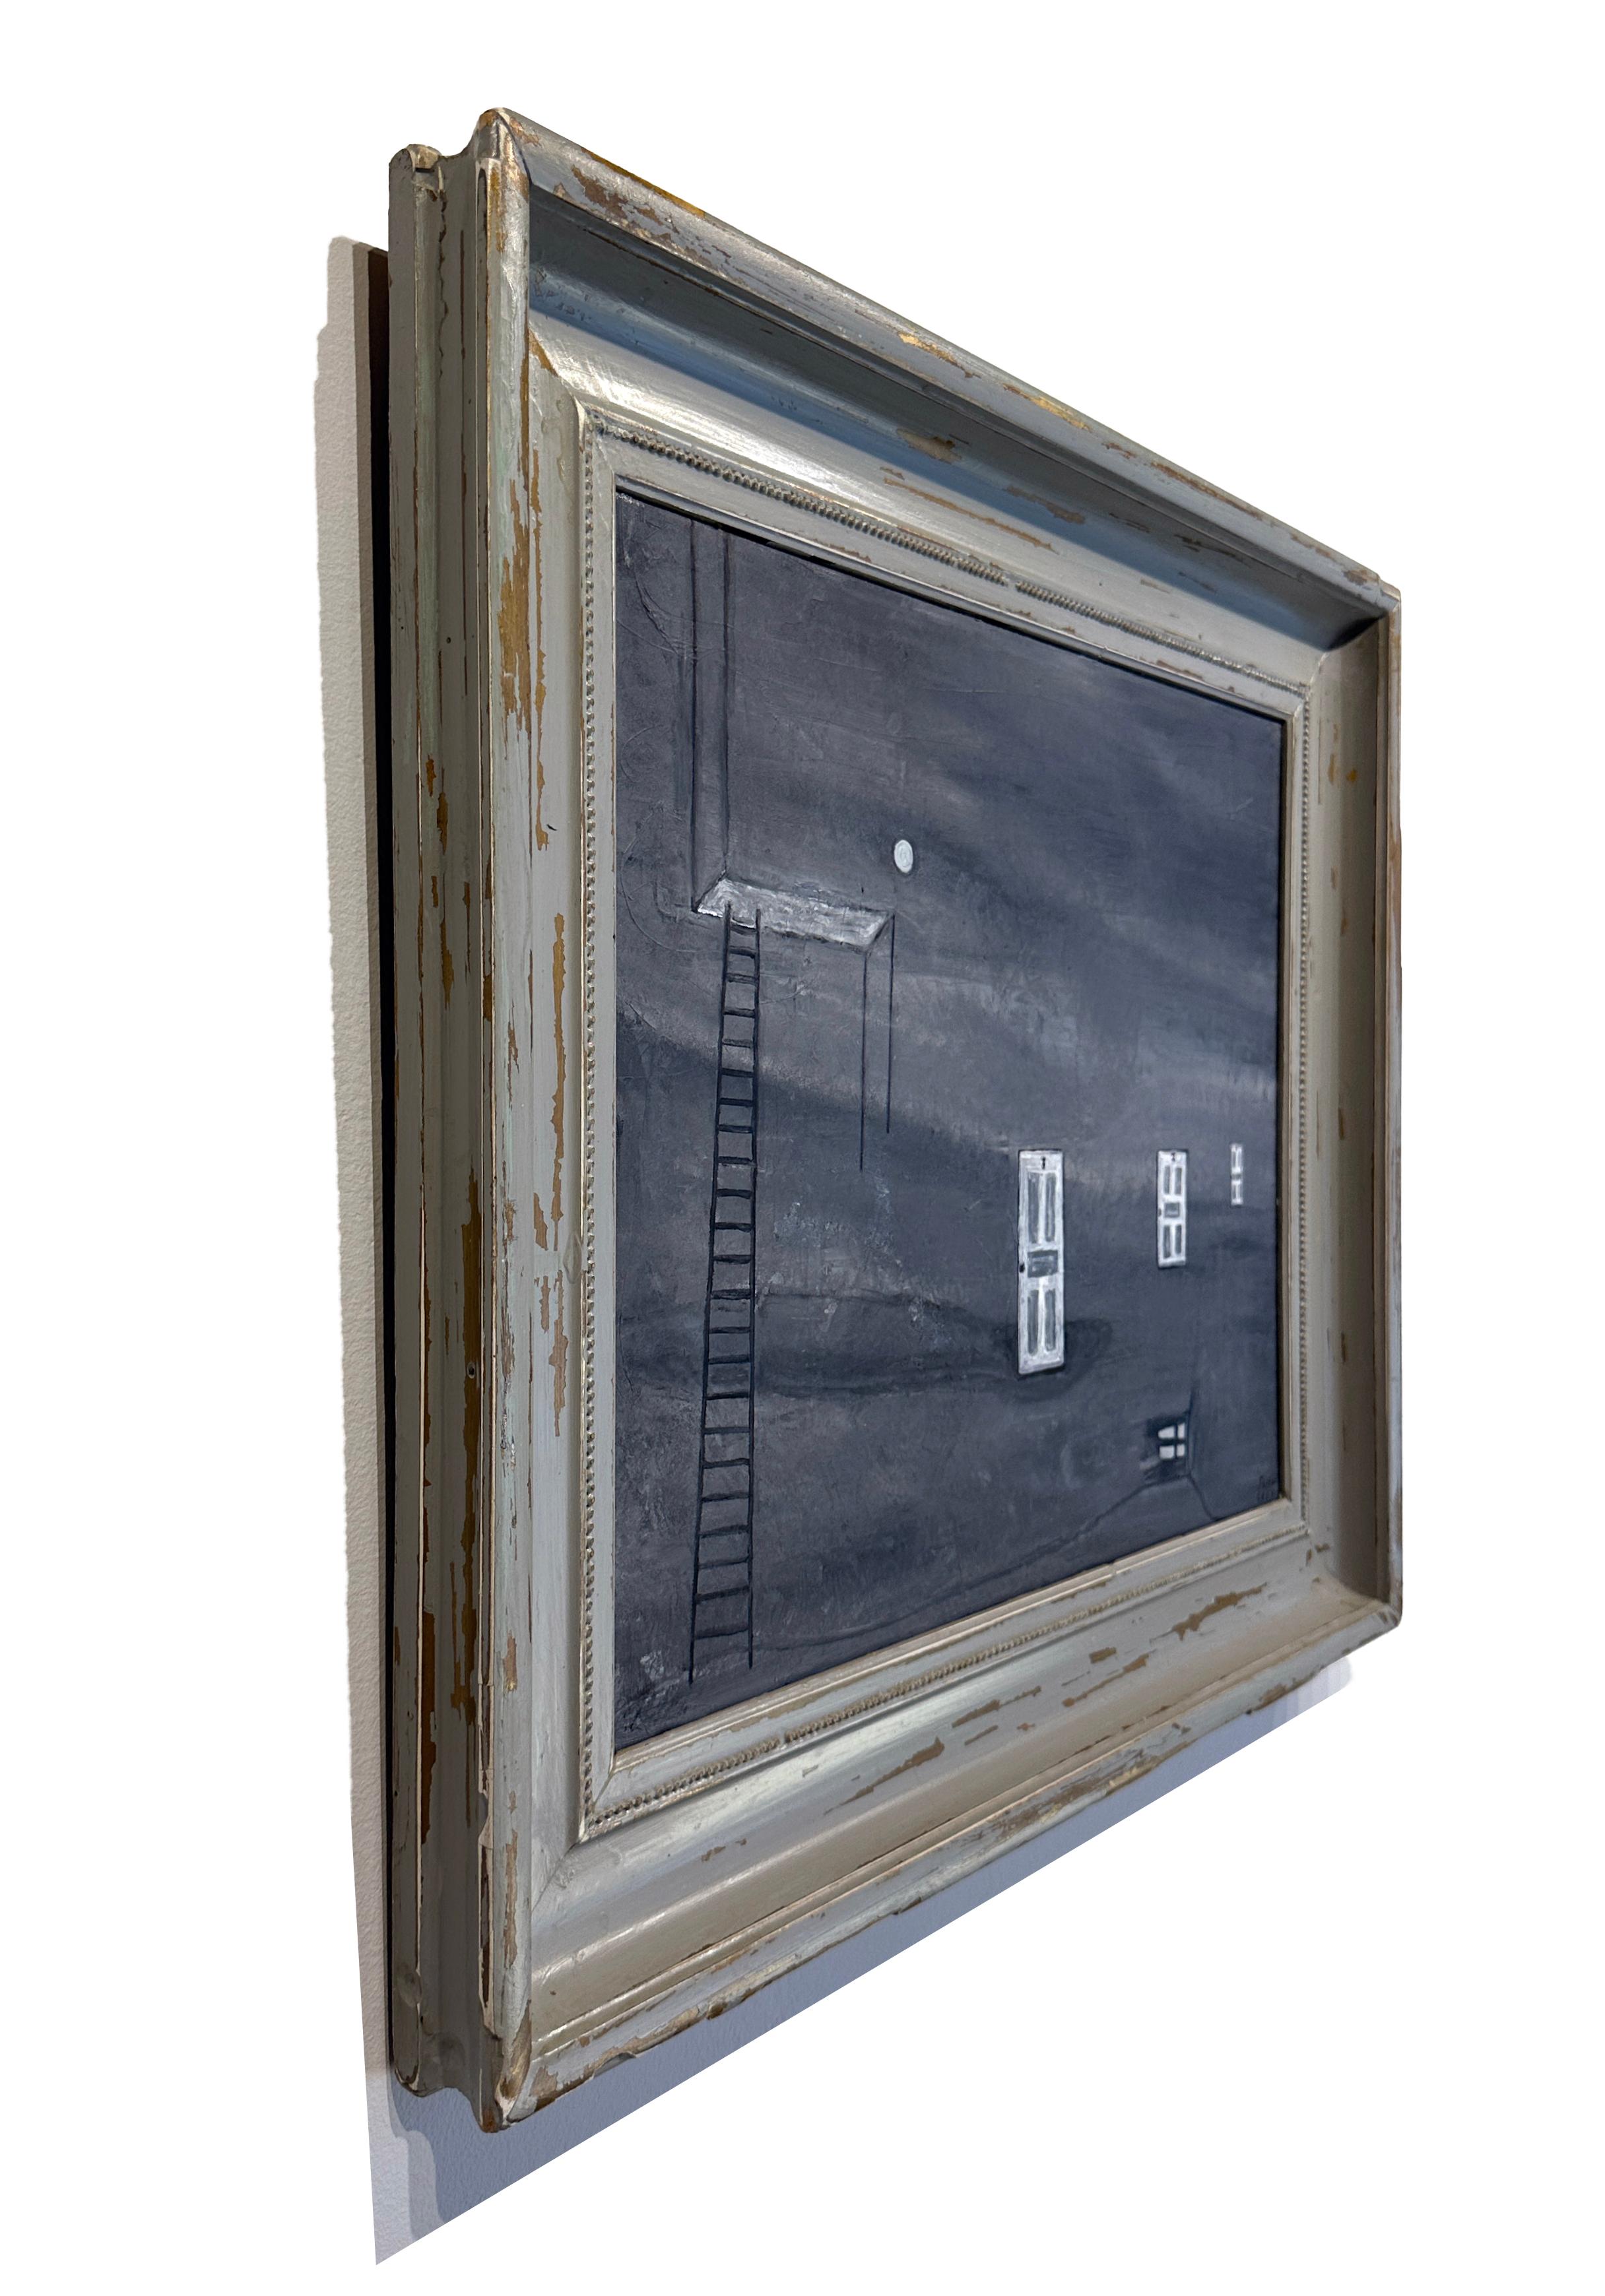 Echo - Monochromatic Scene, Ladder and Doors in Muted Gray, Original Oil, Framed - Contemporary Painting by John Seubert